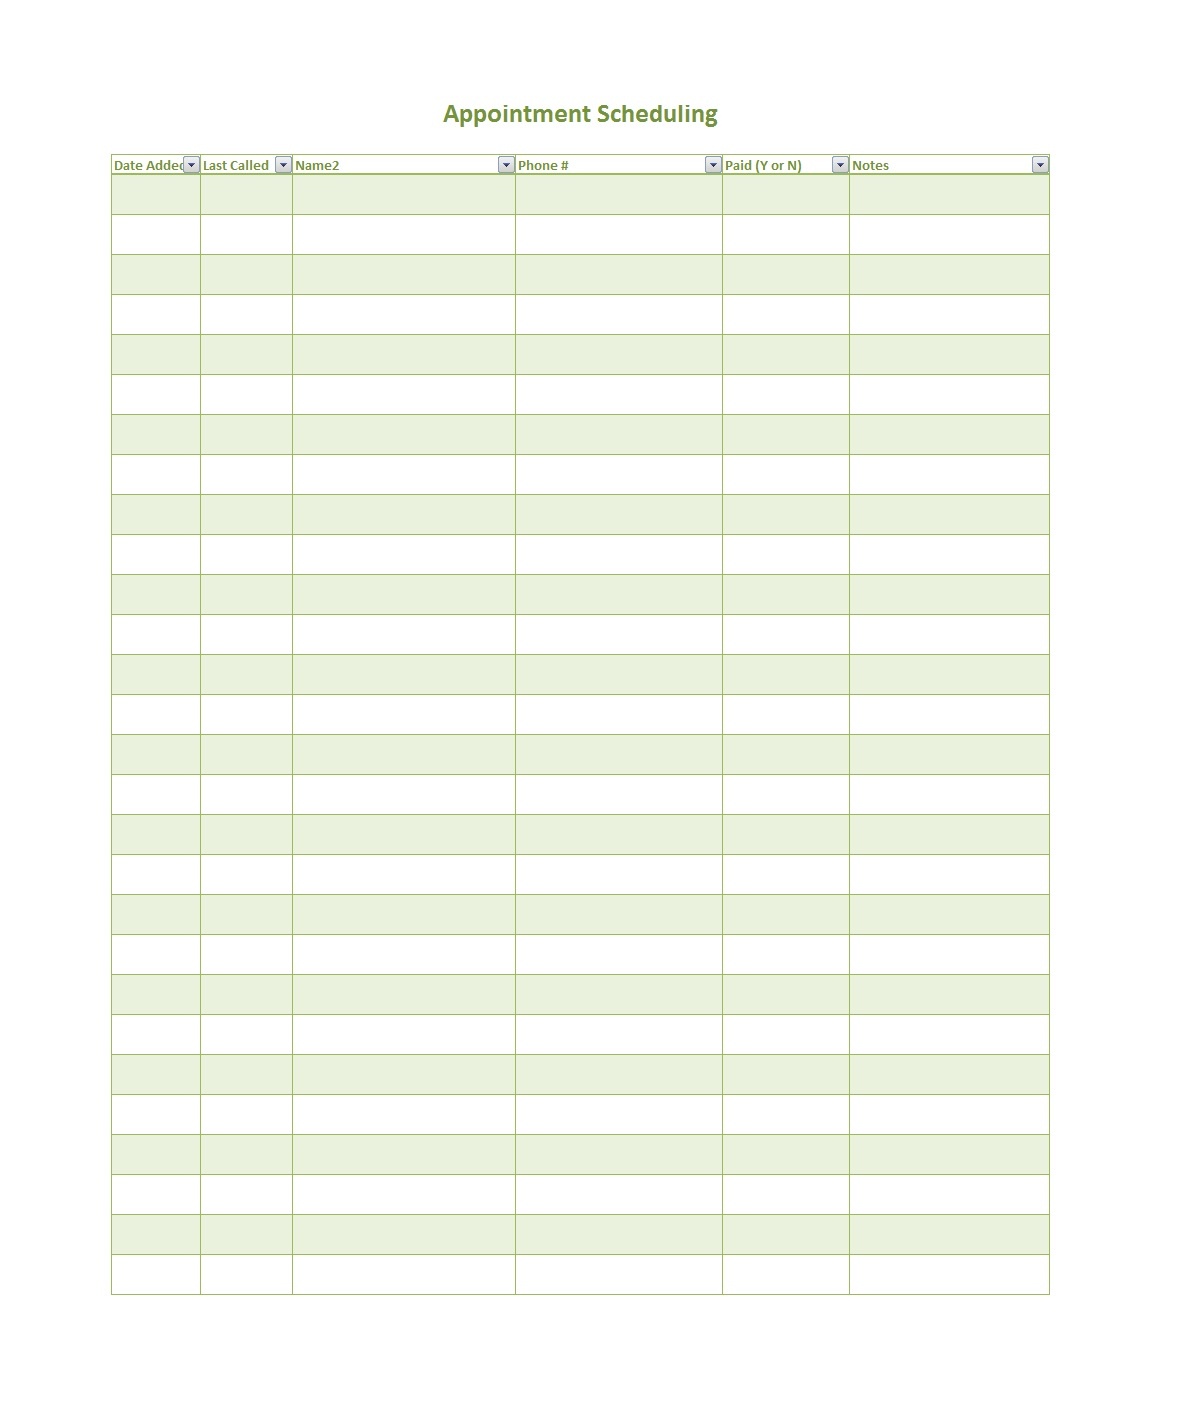 45 Printable Appointment Schedule Templates [&amp; Appointment Calendars] - Free Printable Appointment Sheets